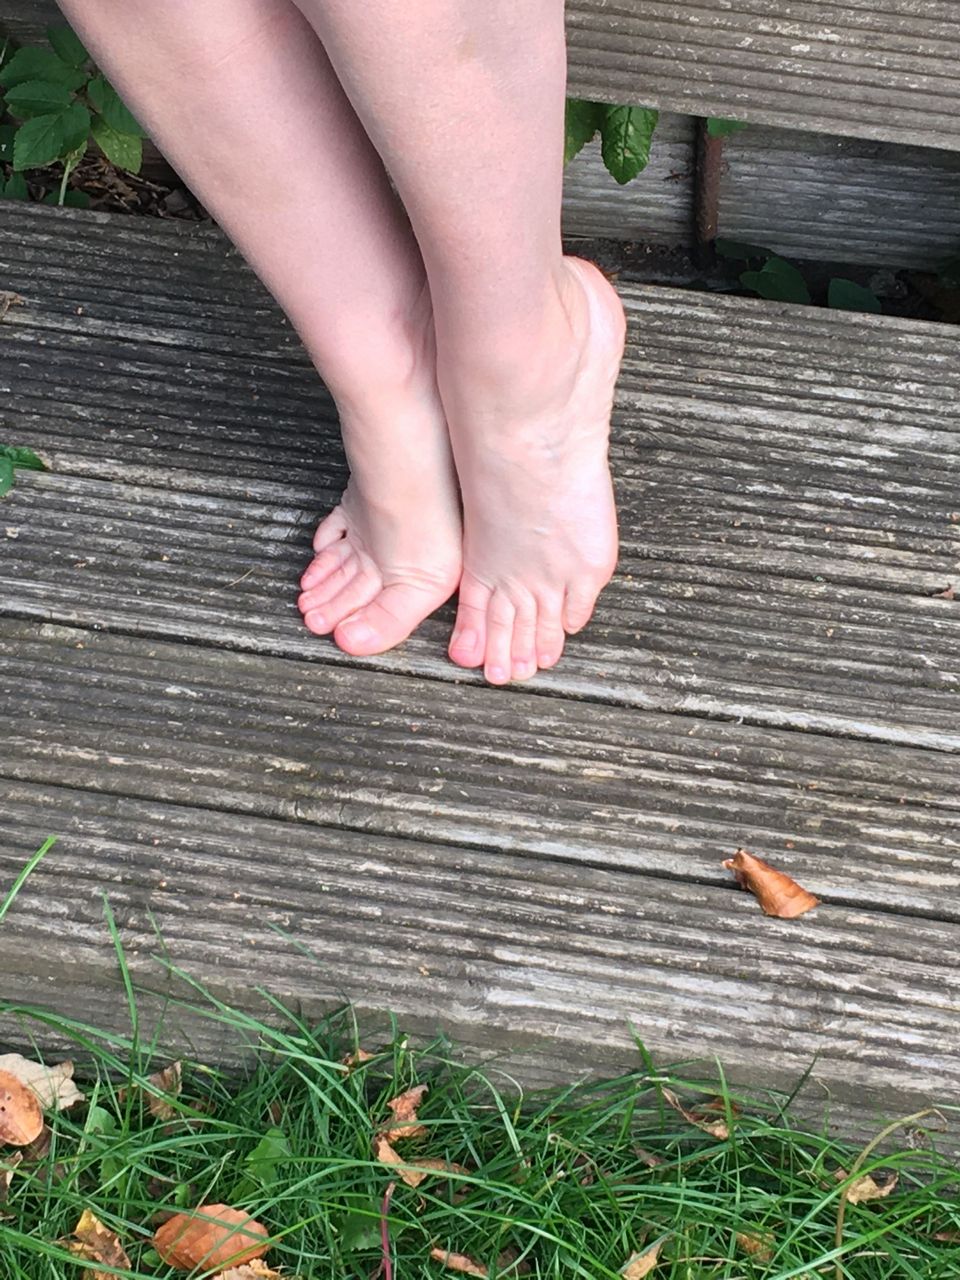 Lespieds Barefoot Outside In The Uk